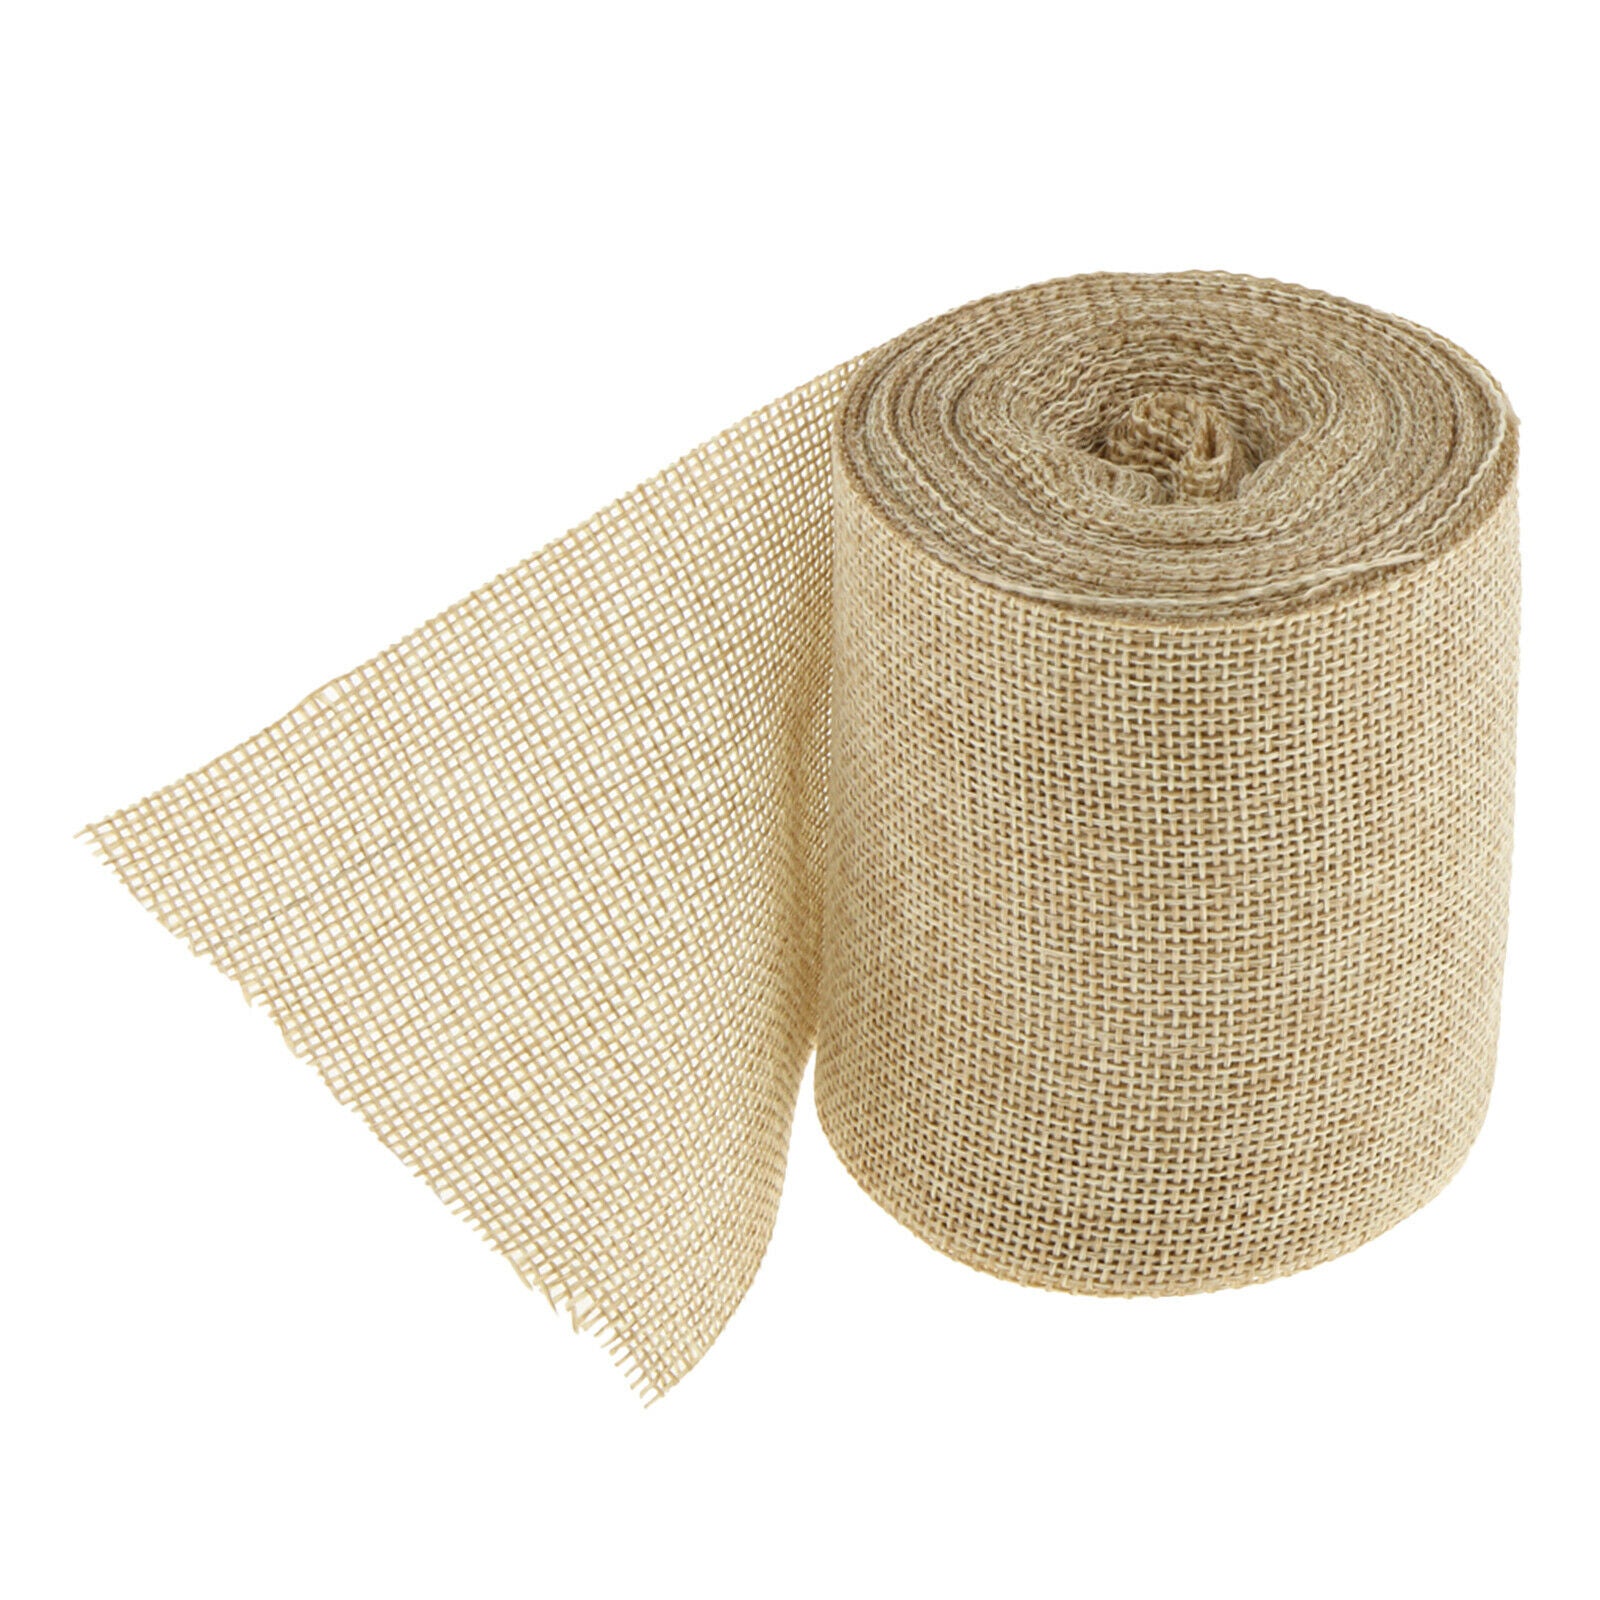 Roll of Handcrafted Tape 11 Yards 6 Inches Wide Burlap Tape